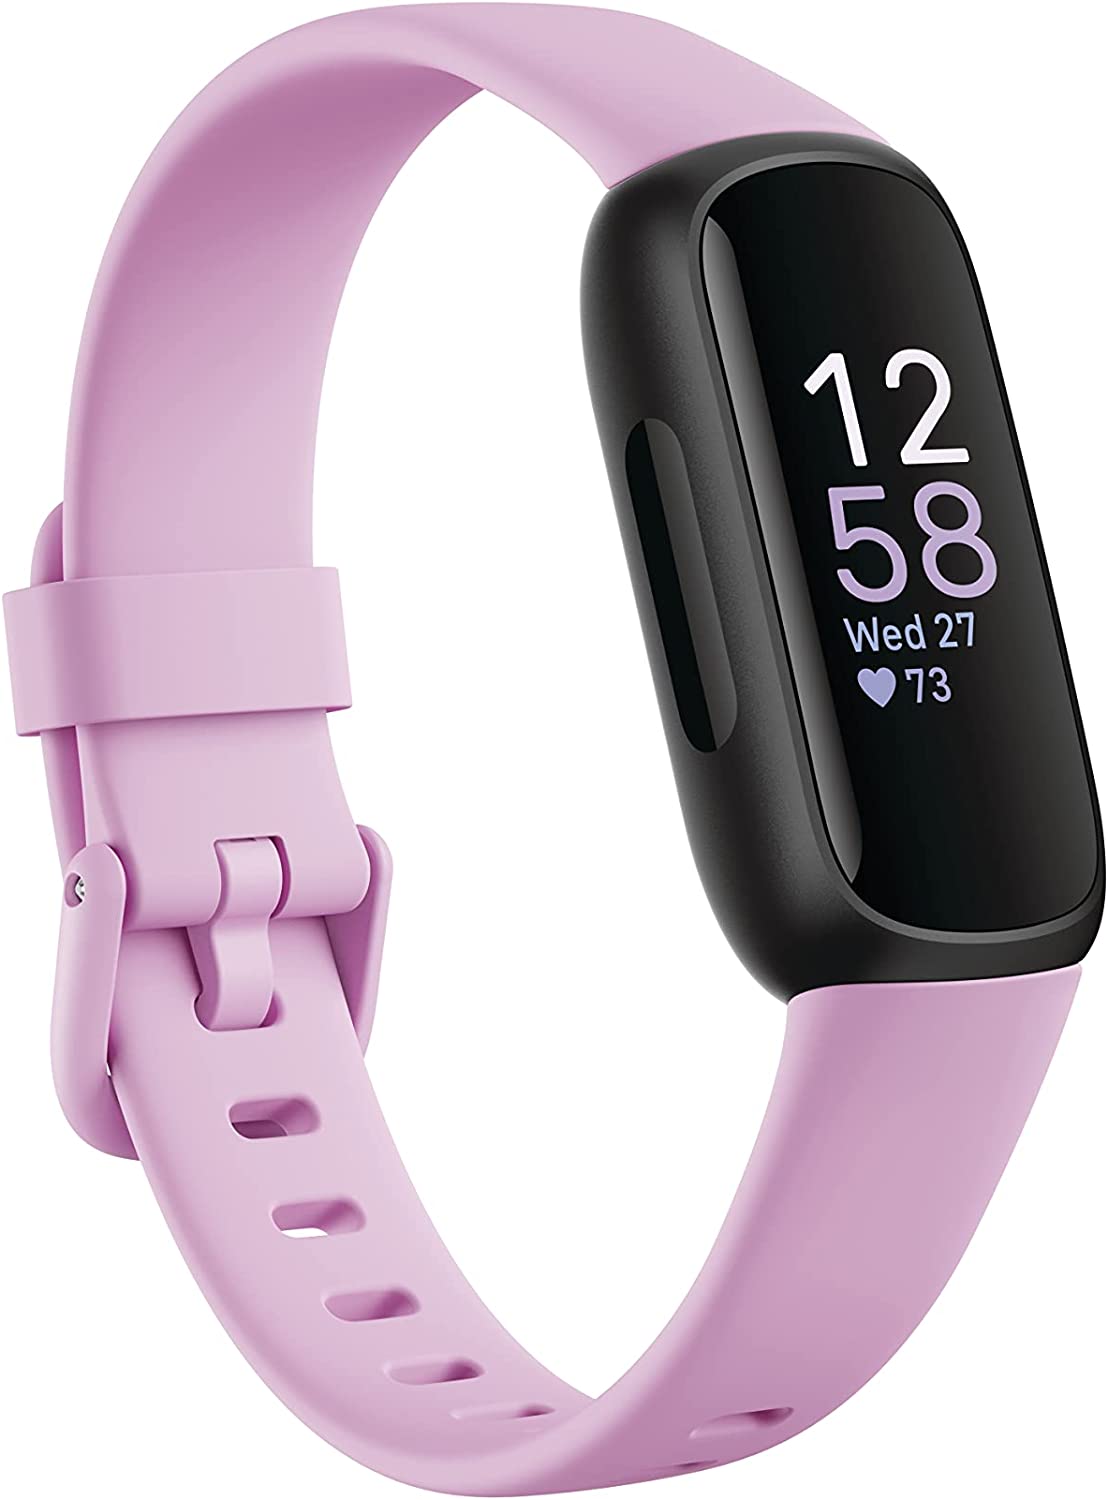 Fitbit Inspire 3 Fitness Tracker w/Stress Management - Lilac Bliss (Certified Refurbished)